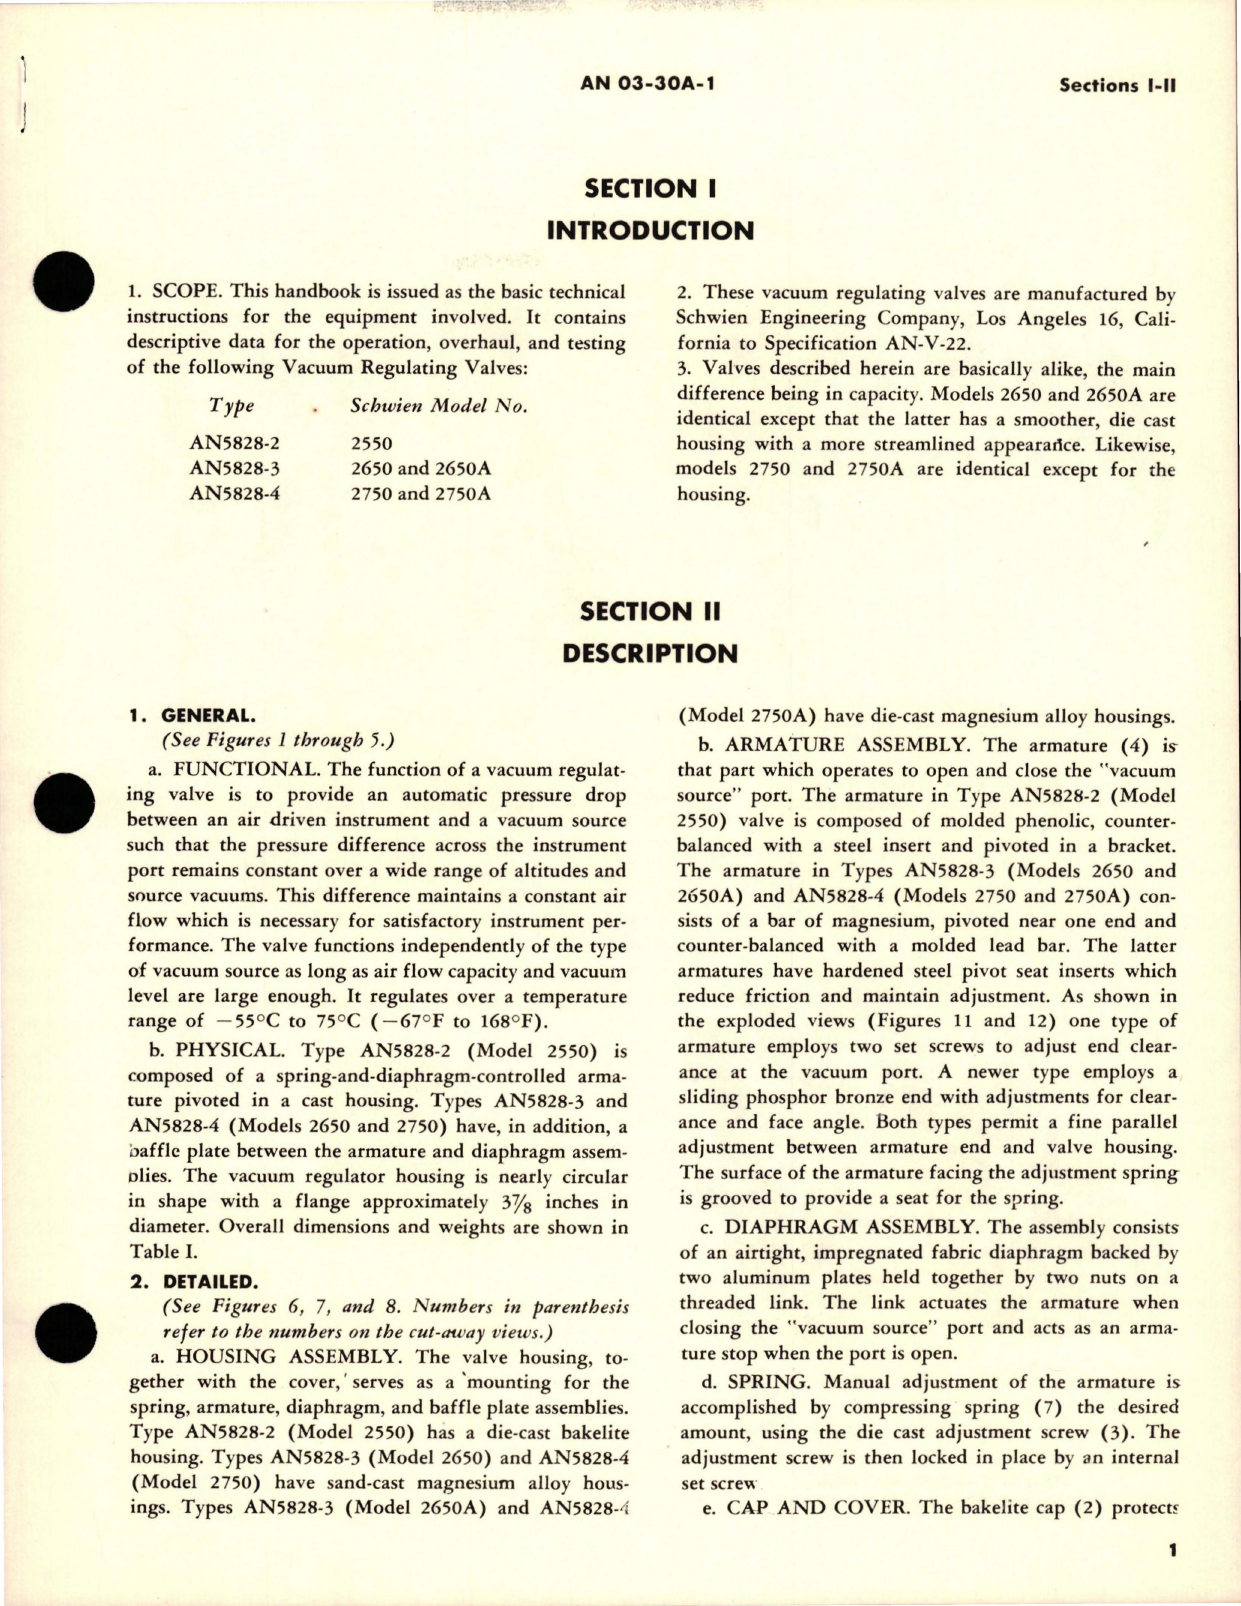 Sample page 5 from AirCorps Library document: Operation, Service and Overhaul Instructions with Parts Catalog for Vacuum Regulating Valves